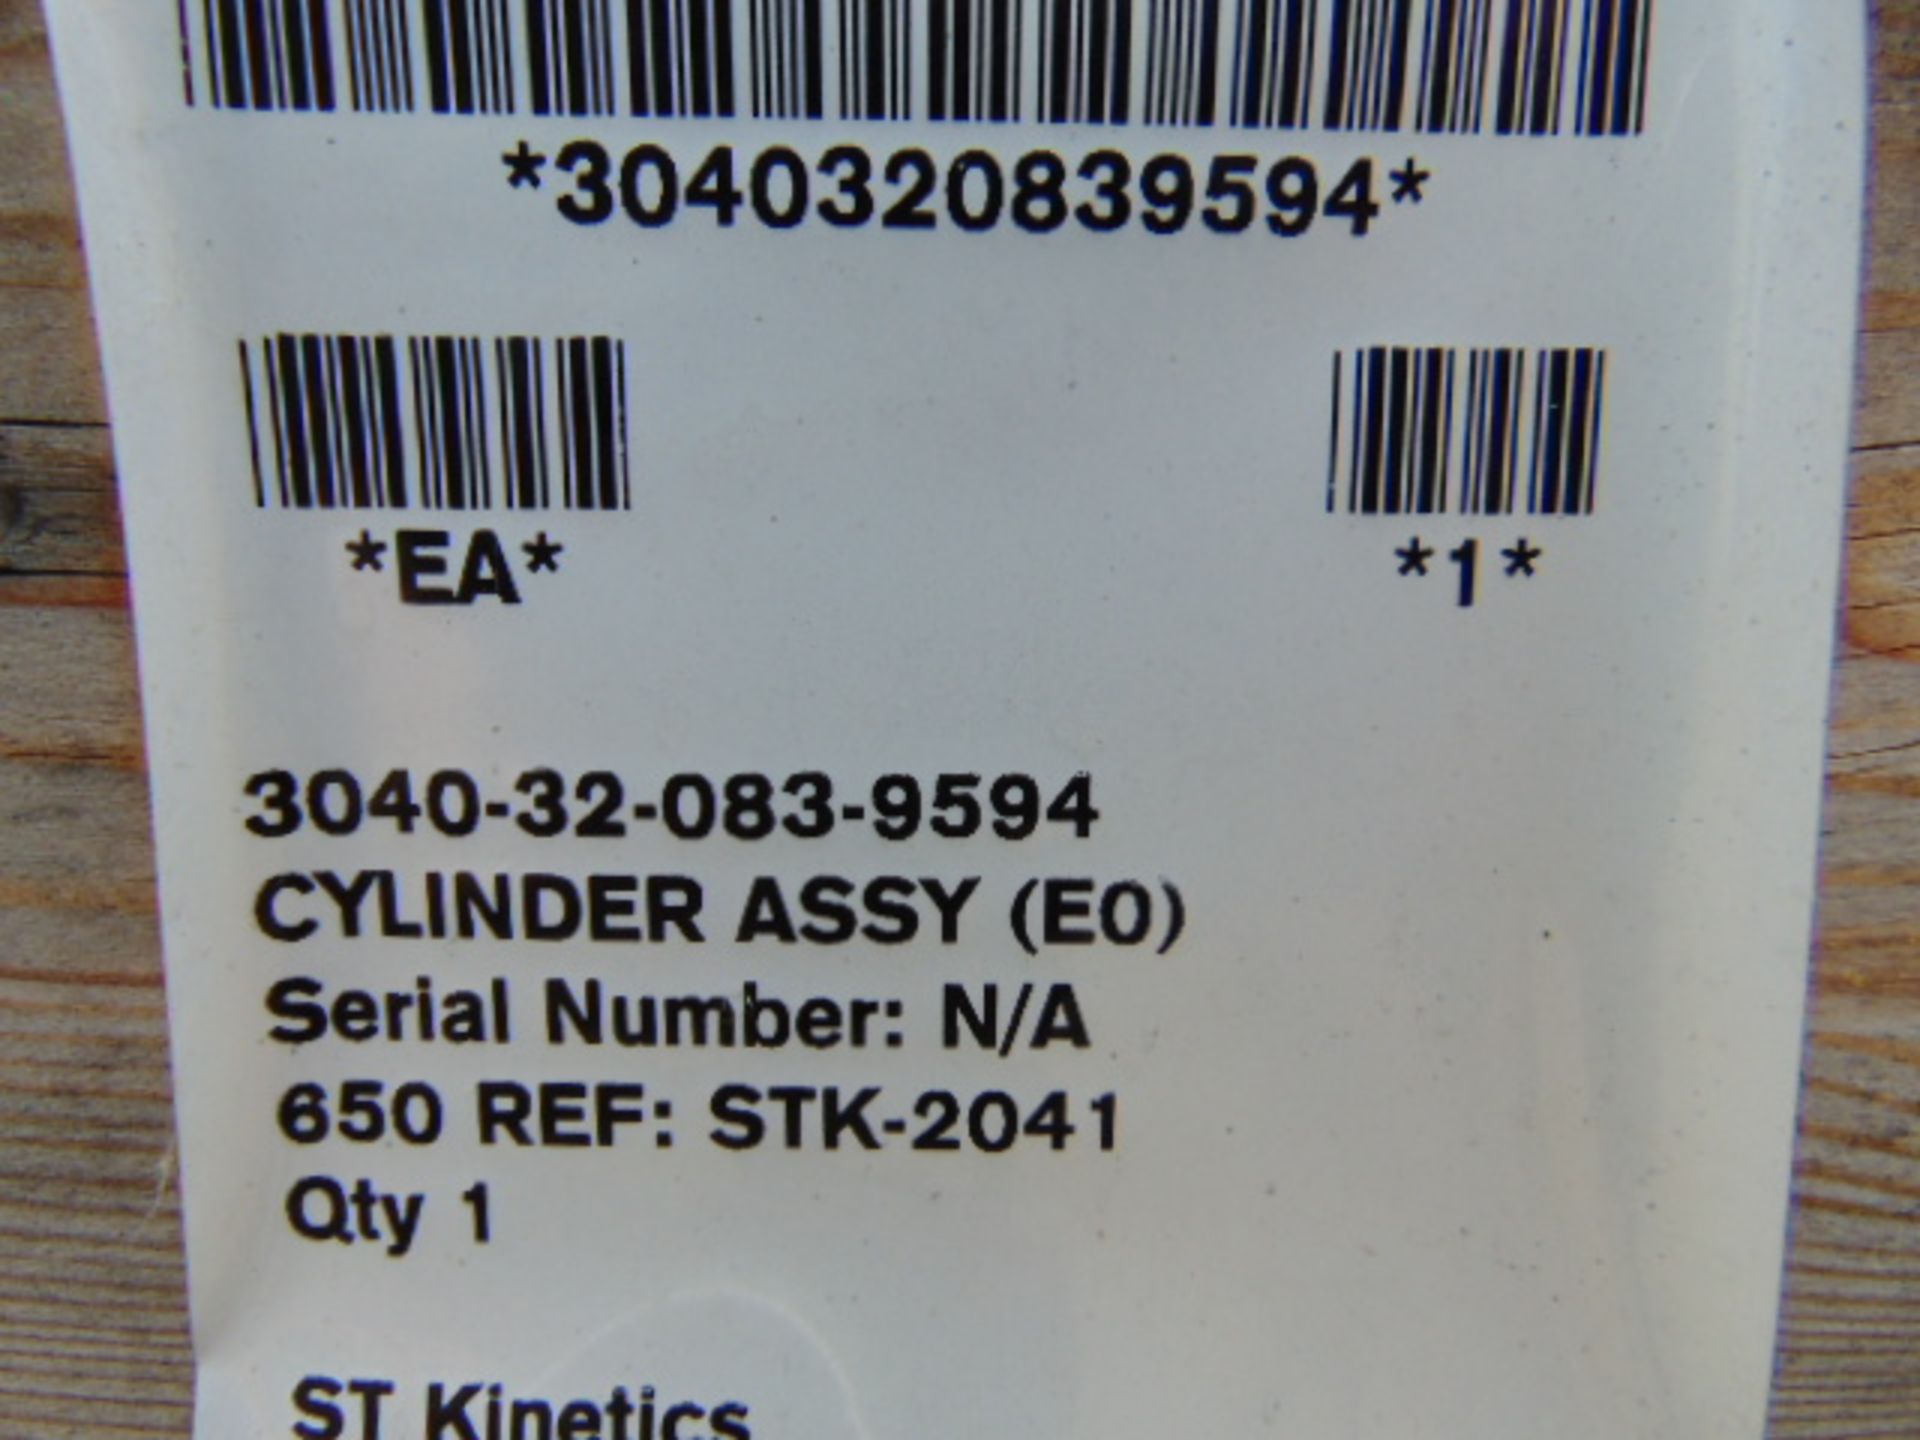 8 x Cylinder Assy NSN 3040-32-083-9594 - Image 5 of 6